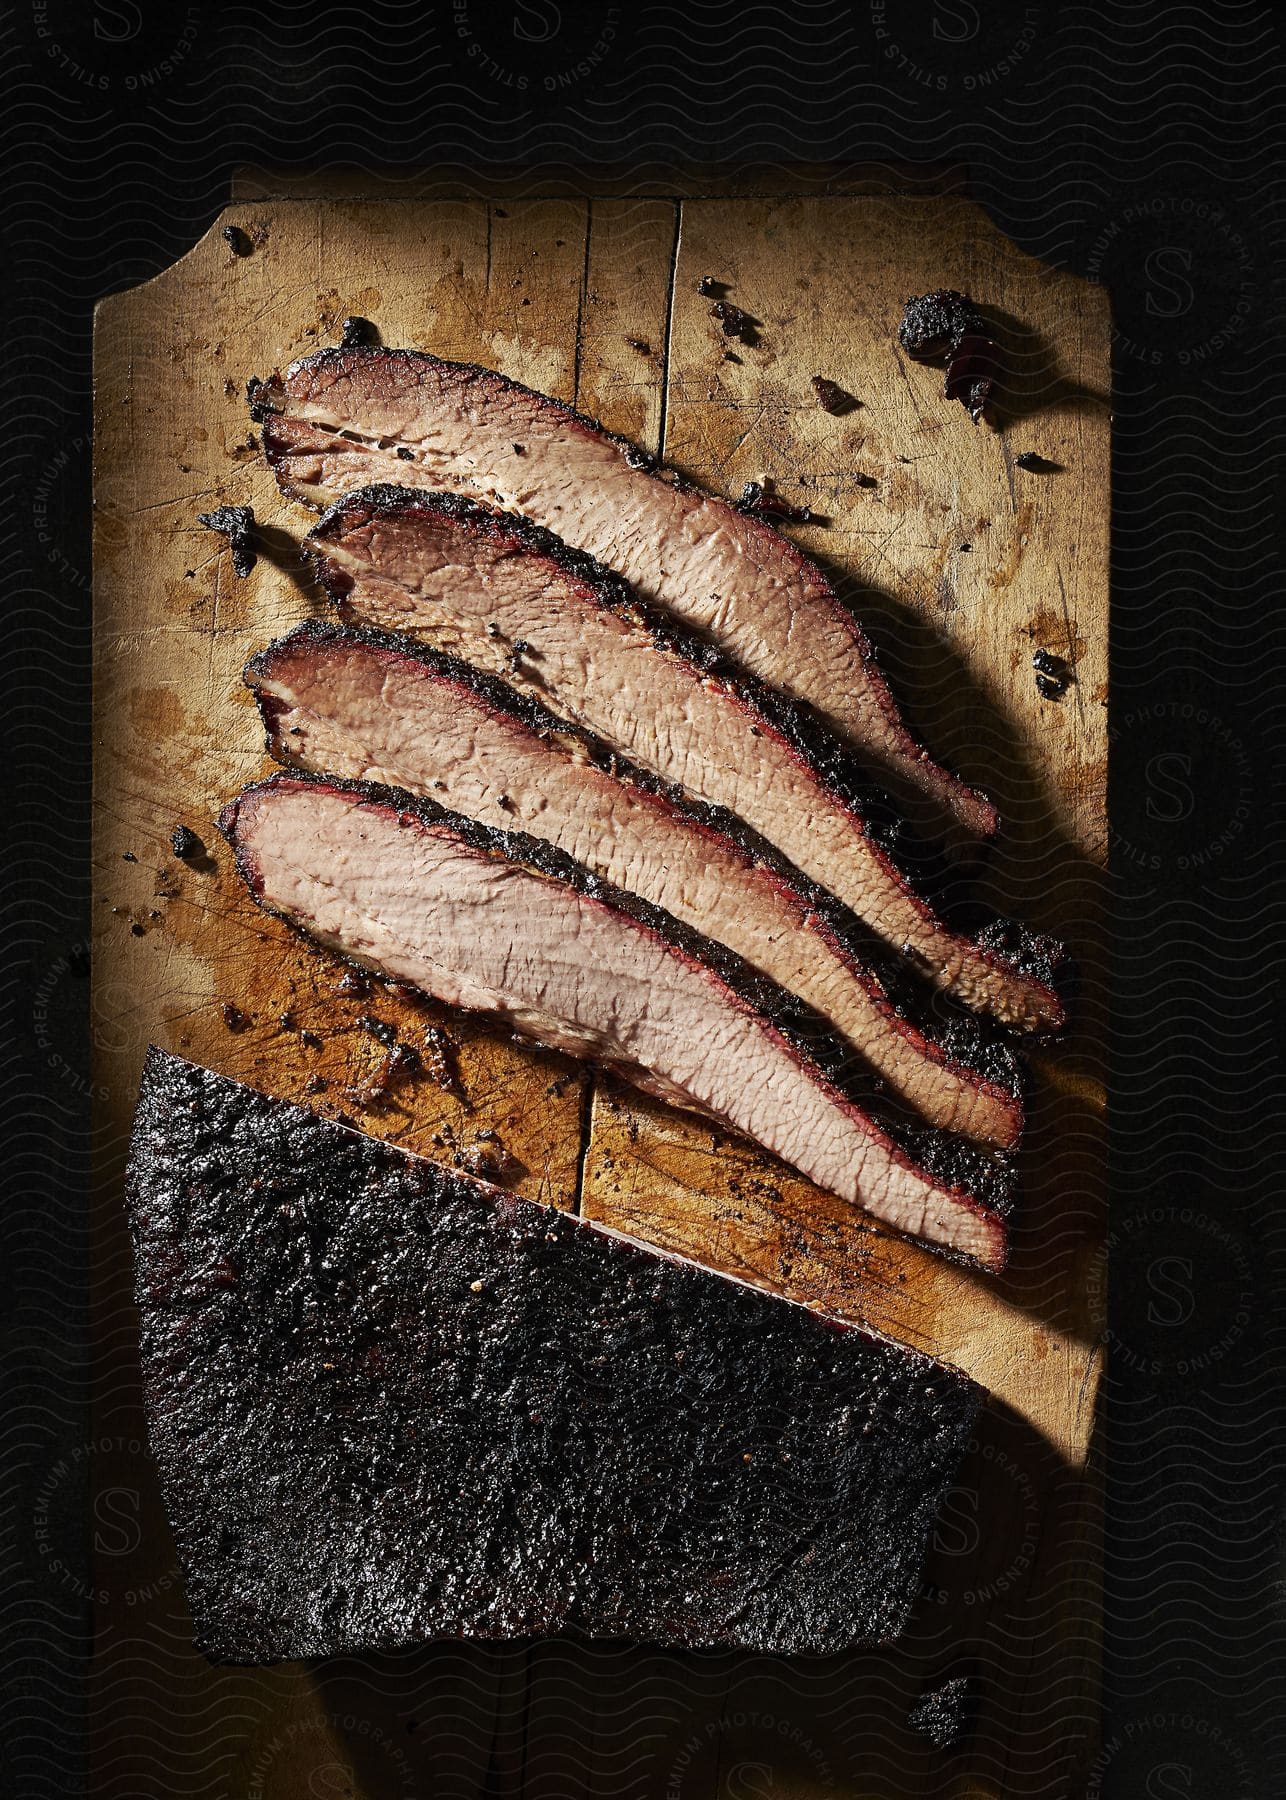 Stock photo of slow cooked brisket sliced on a cutting board